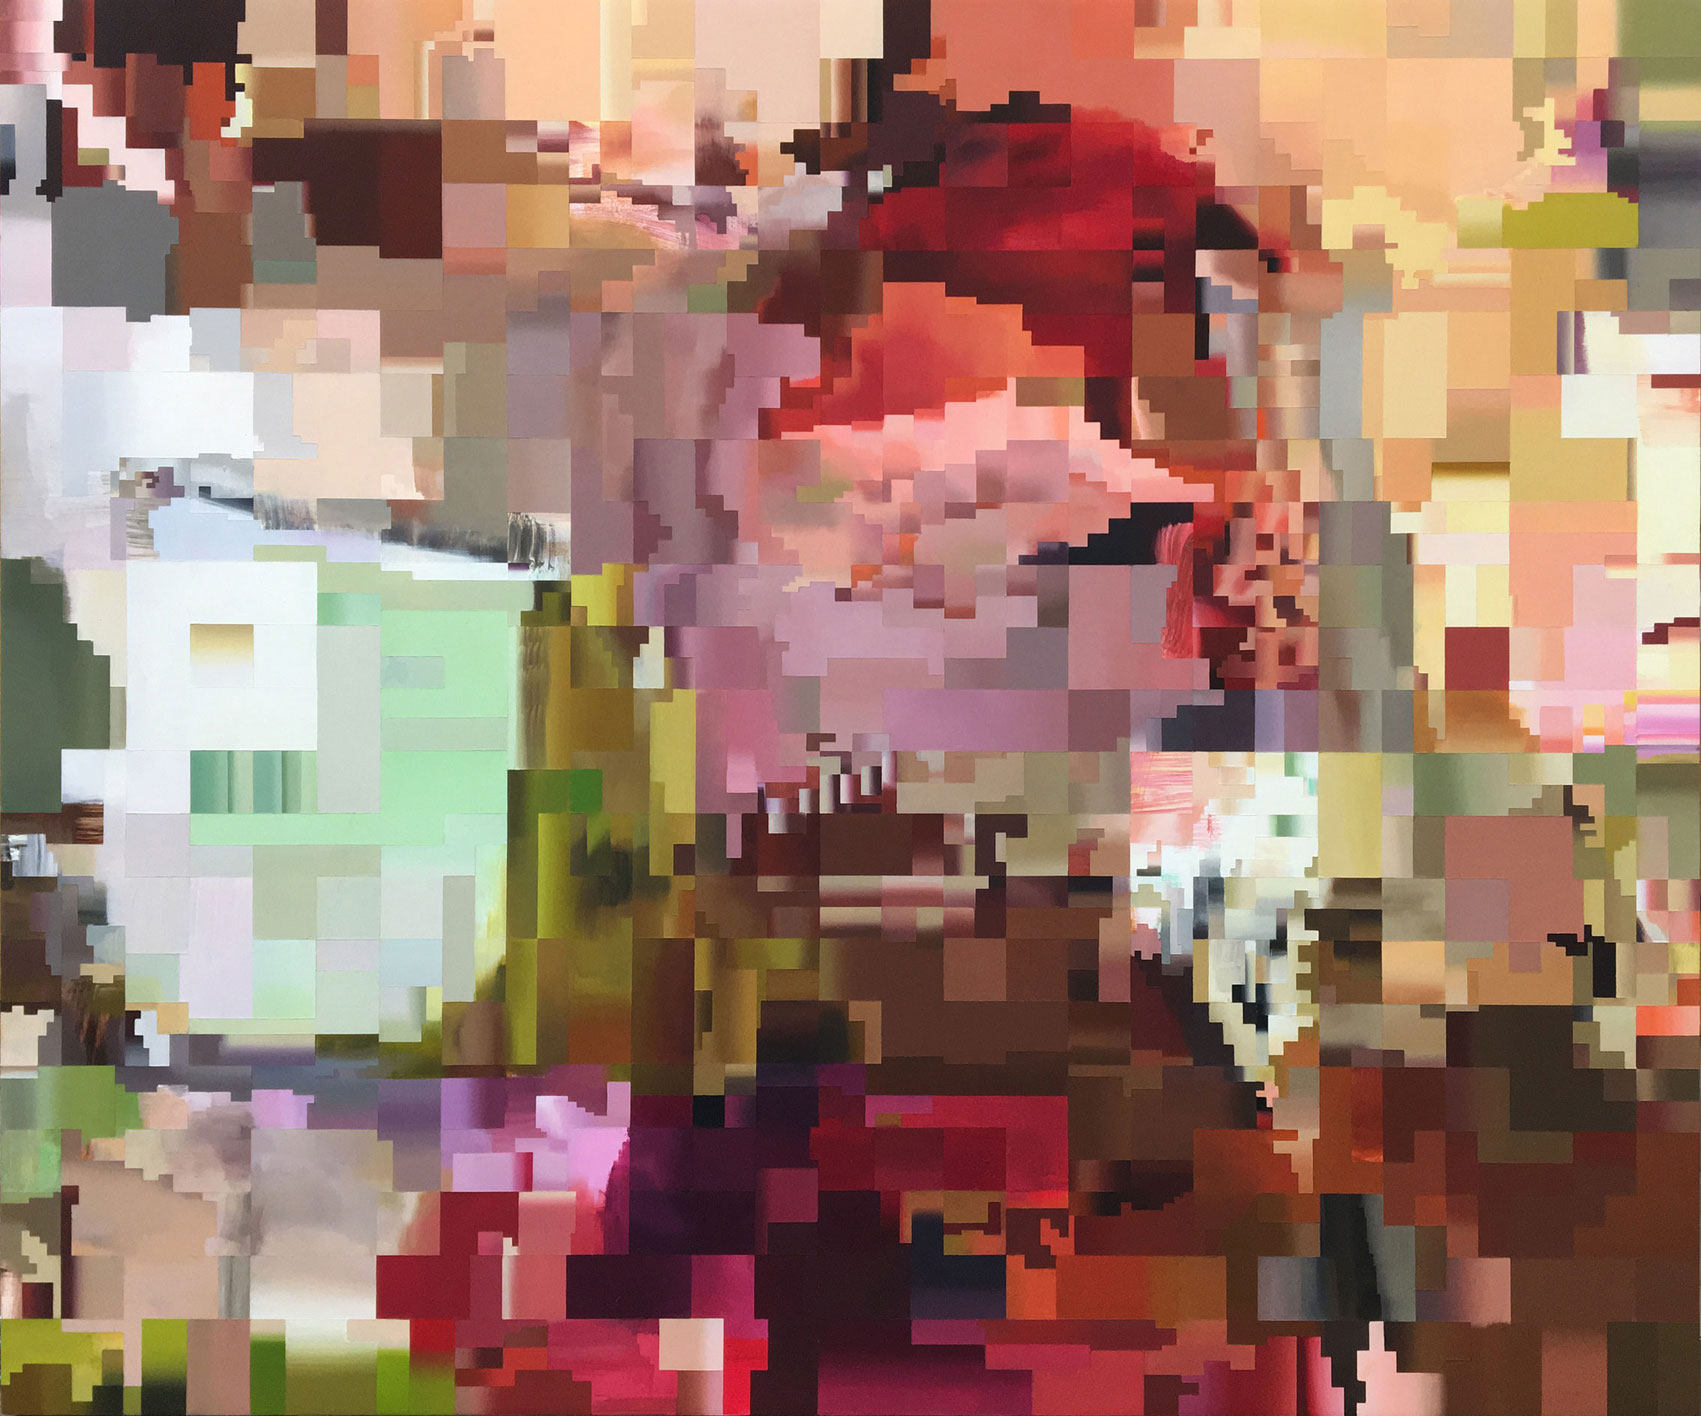 Oil painting by artist and painter Paul Lemmon in strong colours of brown, red and gold depicting a pixelated frame from a glitched digital video